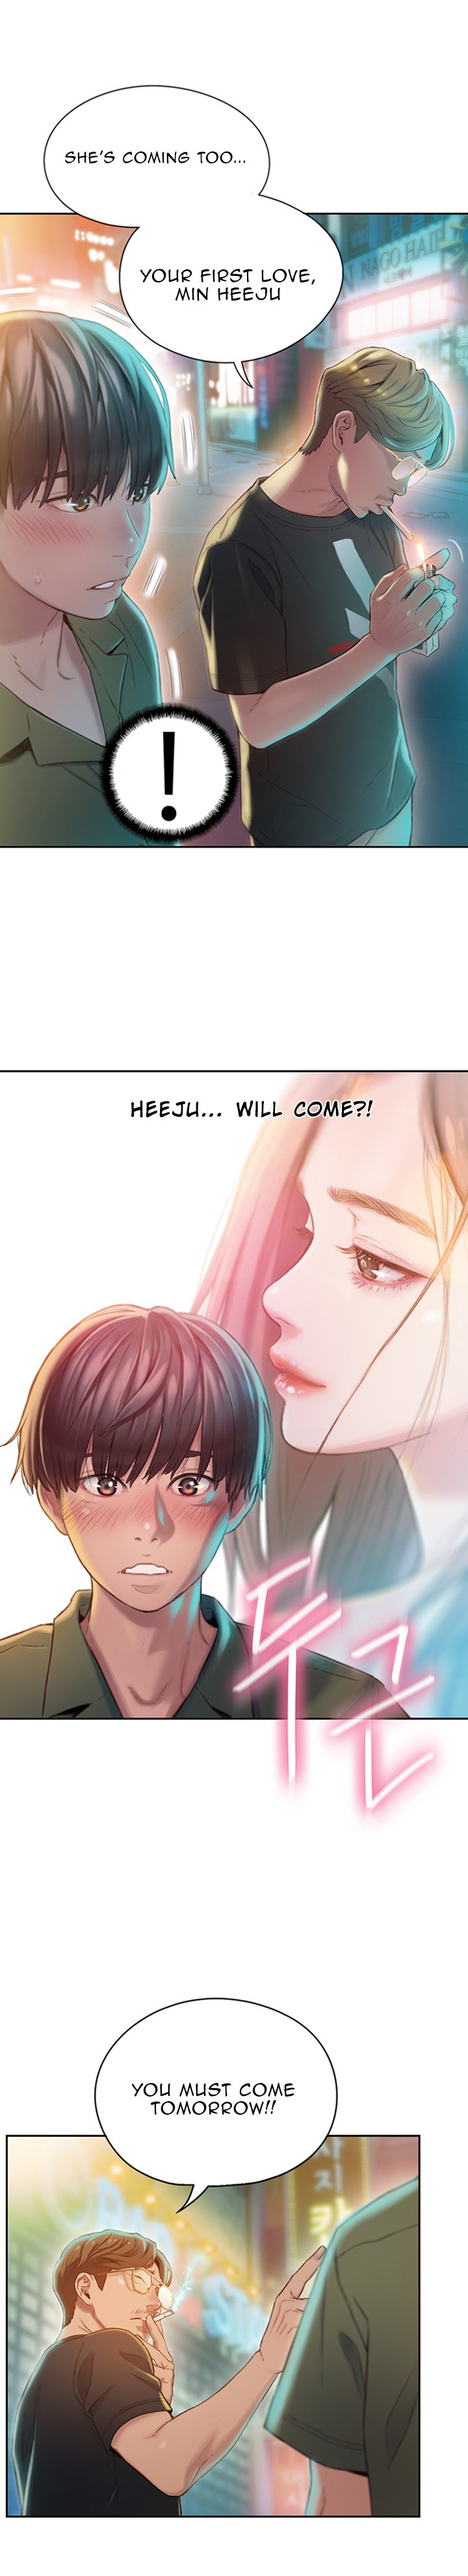 [Park Hyeongjun] Love Limit Exceeded (01-28) Ongoing - Page 29